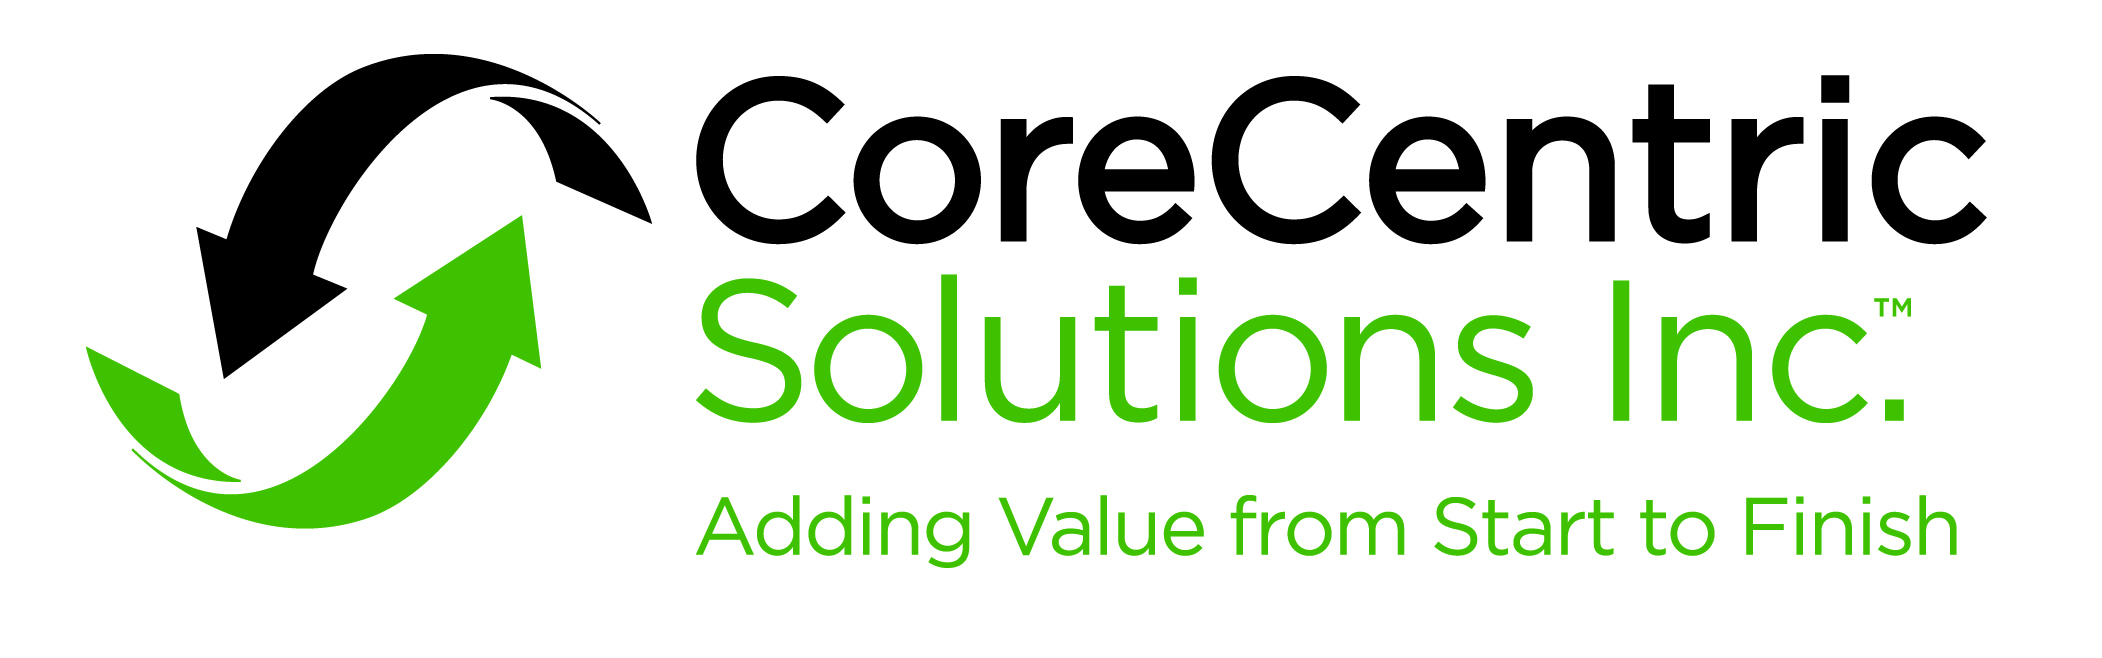 made in illinois featured company: corecentric solutions, inc.